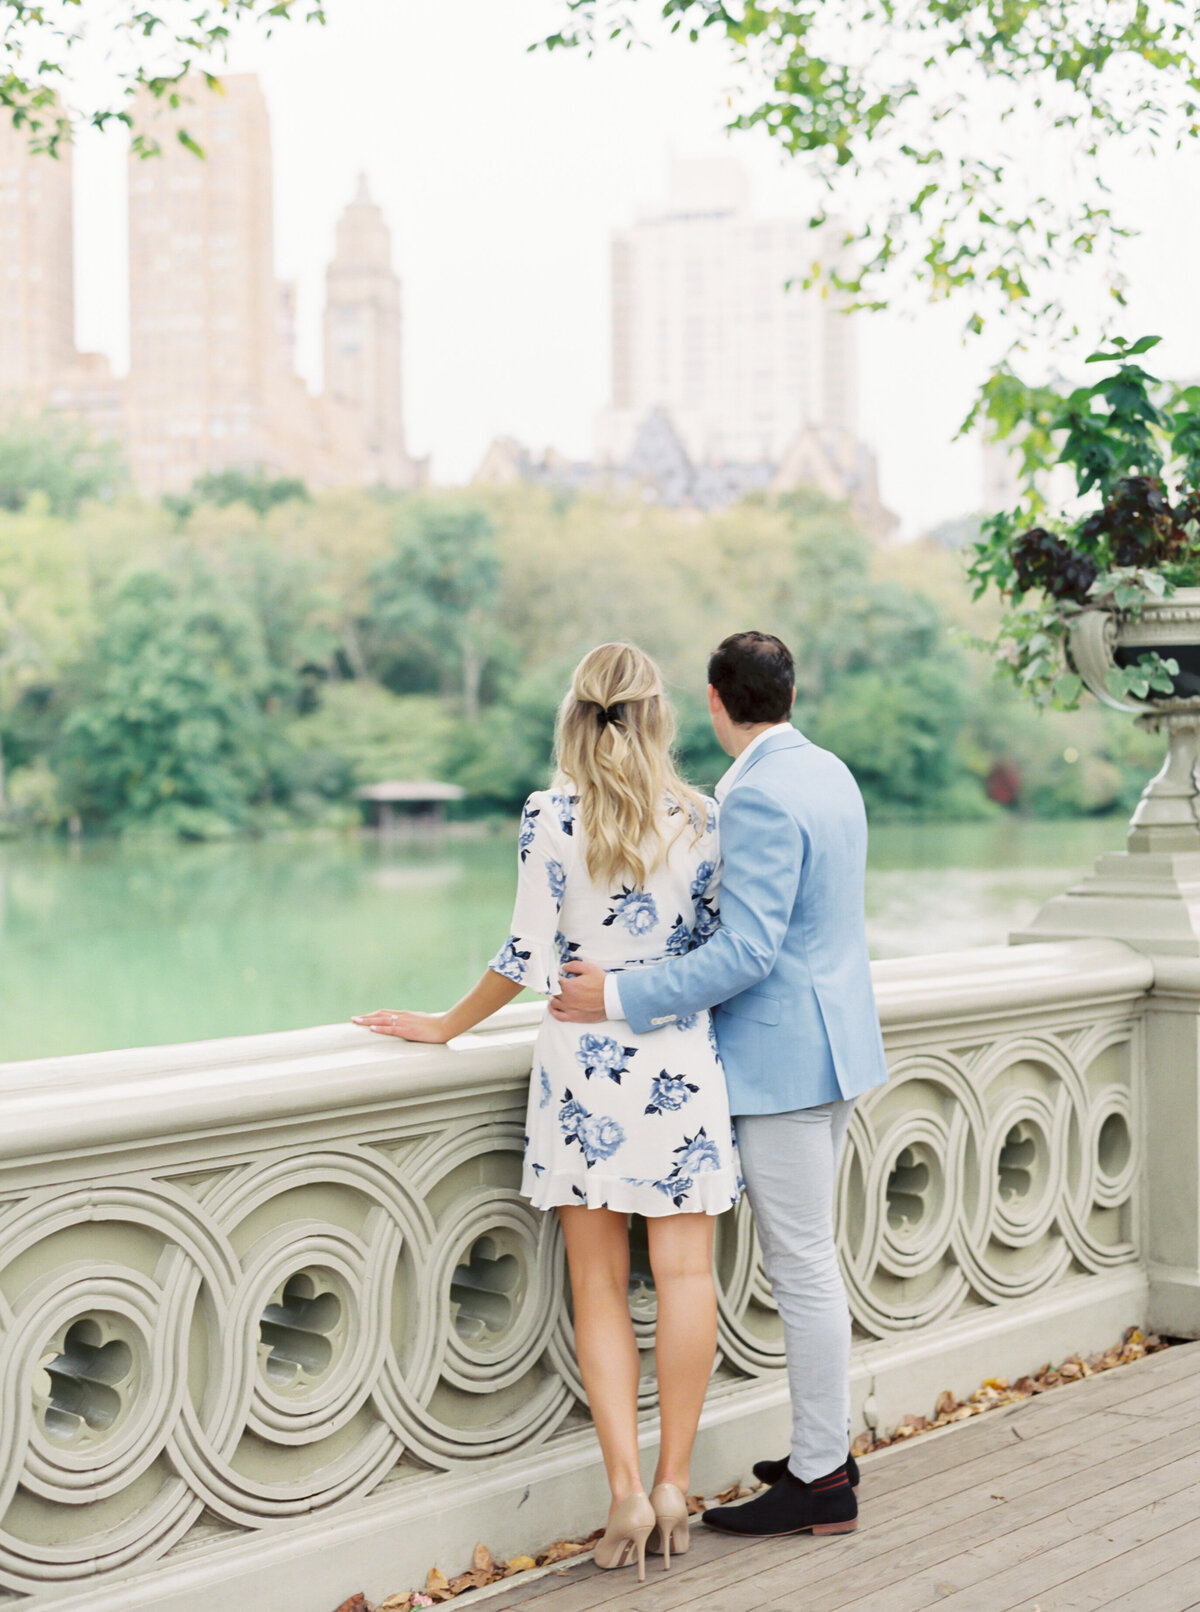 Tiffaney Childs Photography-NYC Wedding Photographer-Andrea + John-Central Park Engagement -41